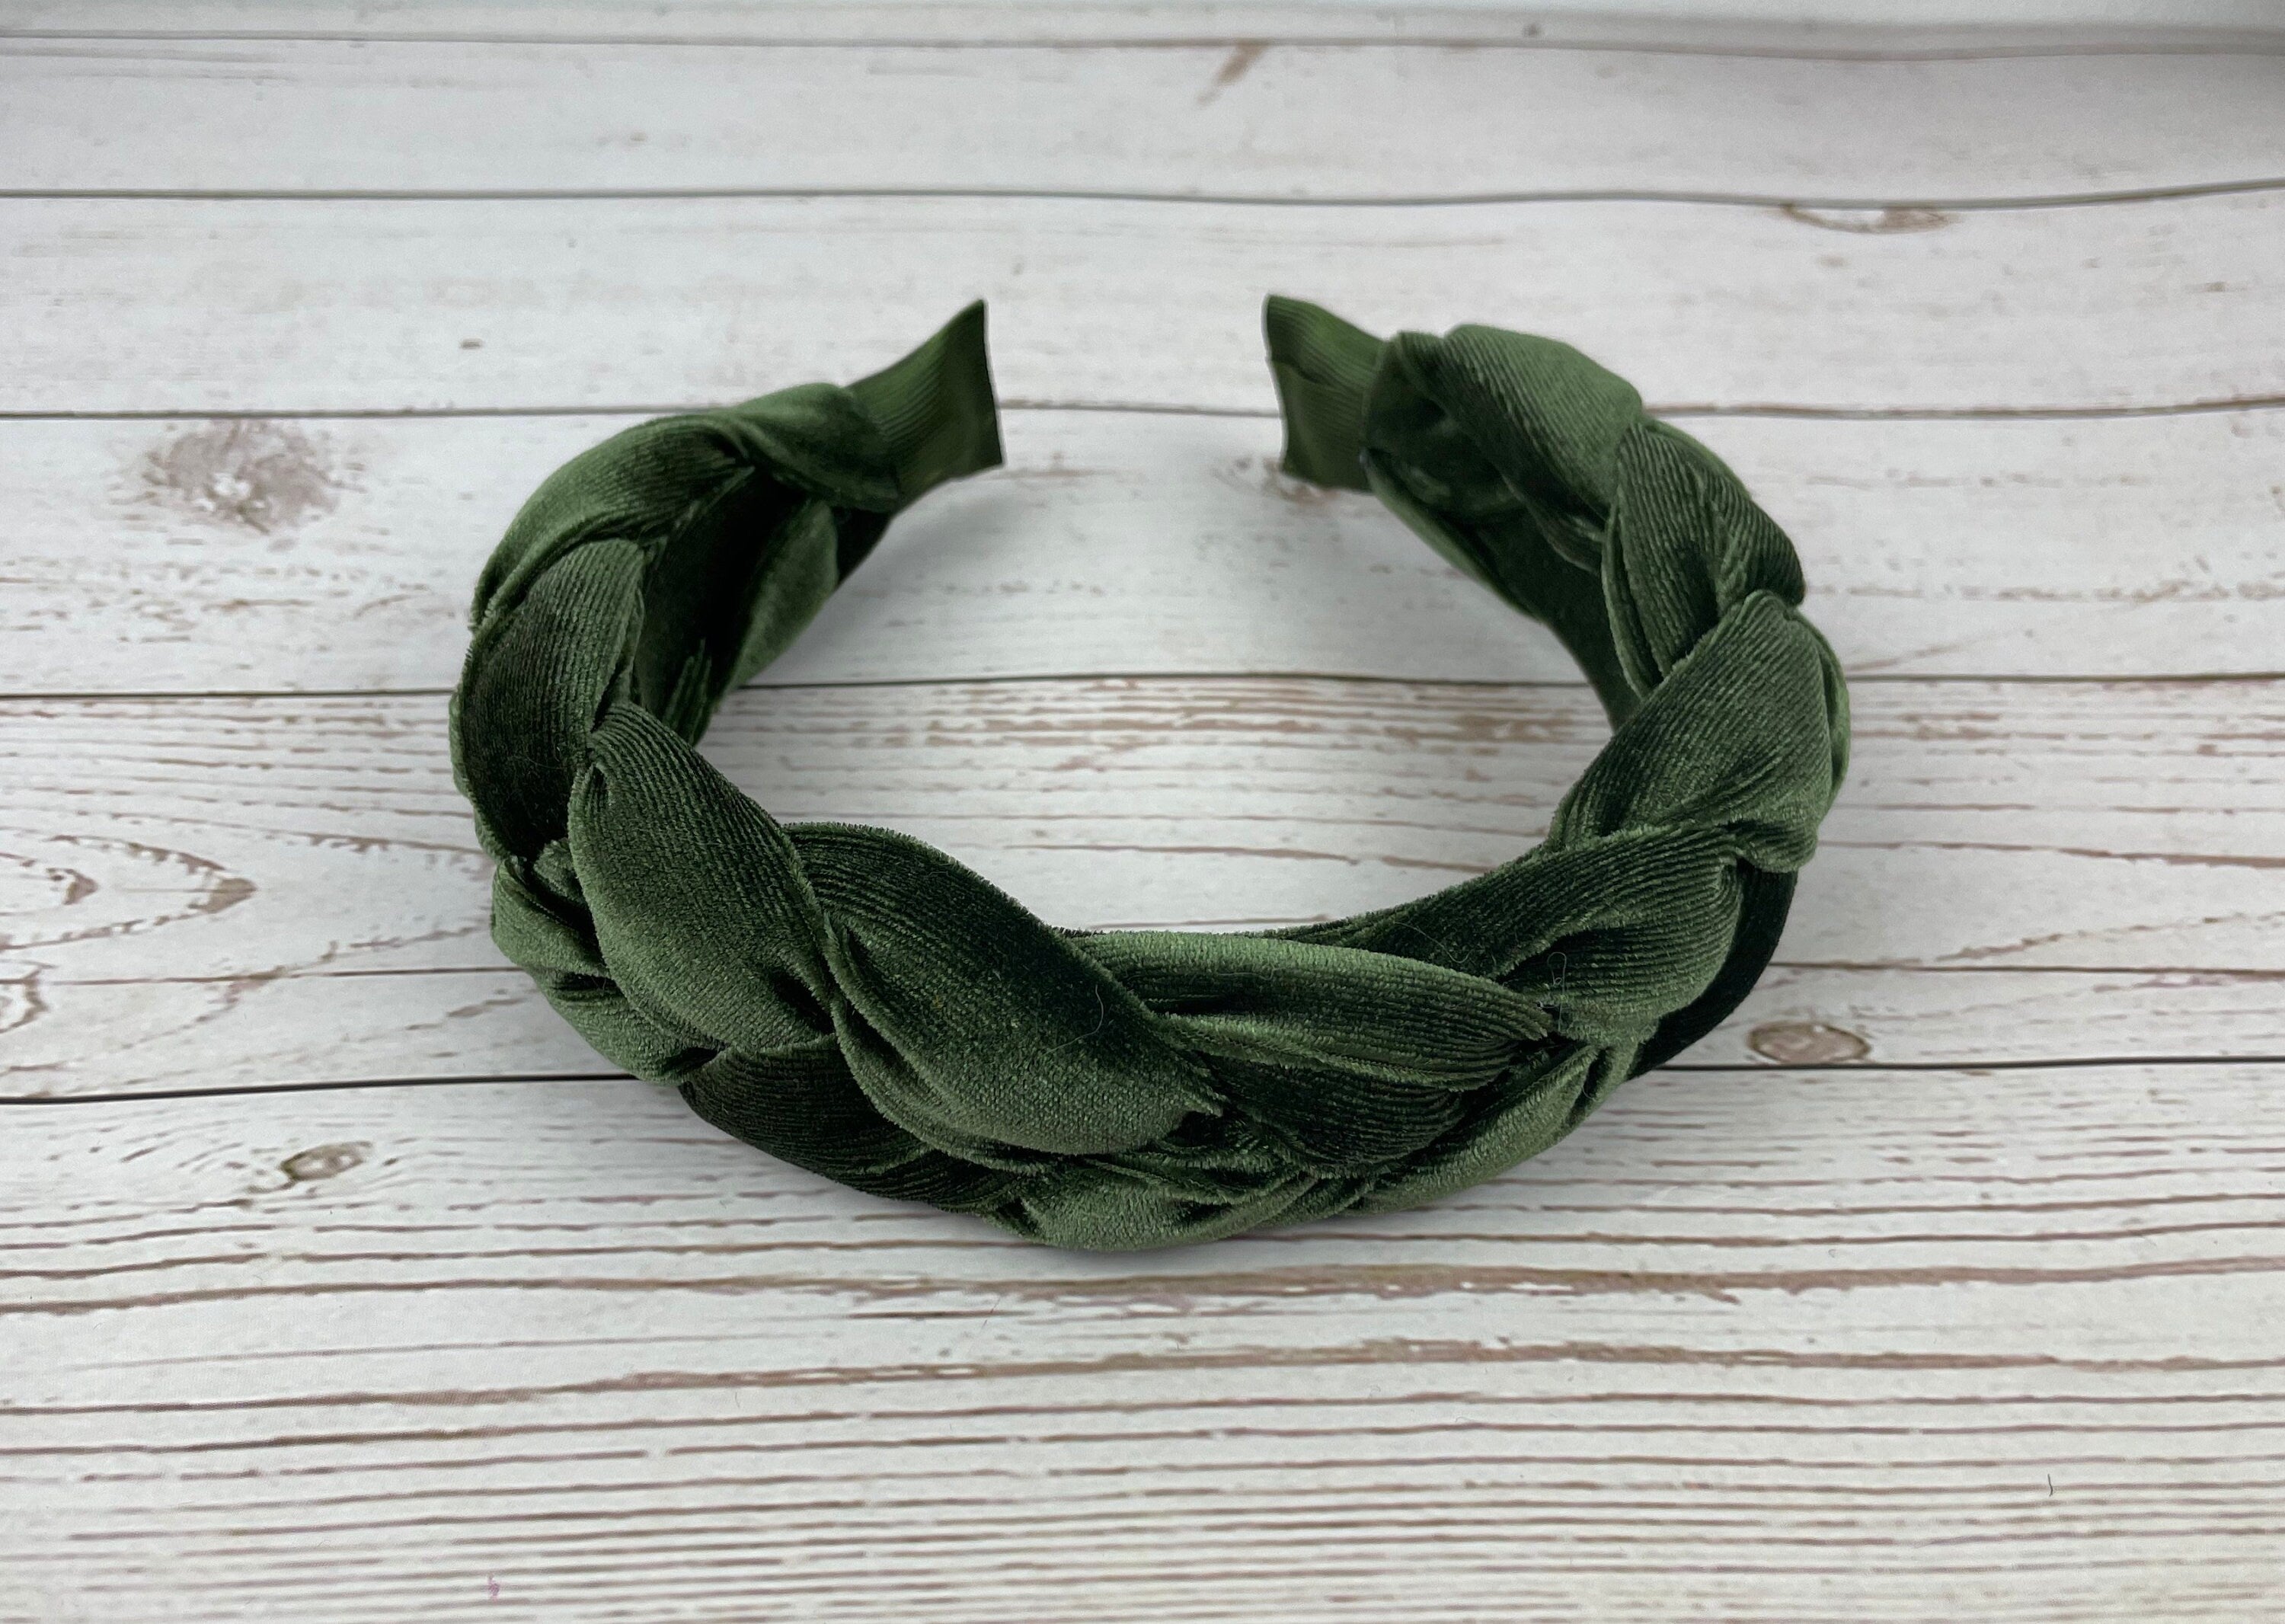 Elevate your look with this trendy knotted headband in army green, perfect for any fashion-forward woman.